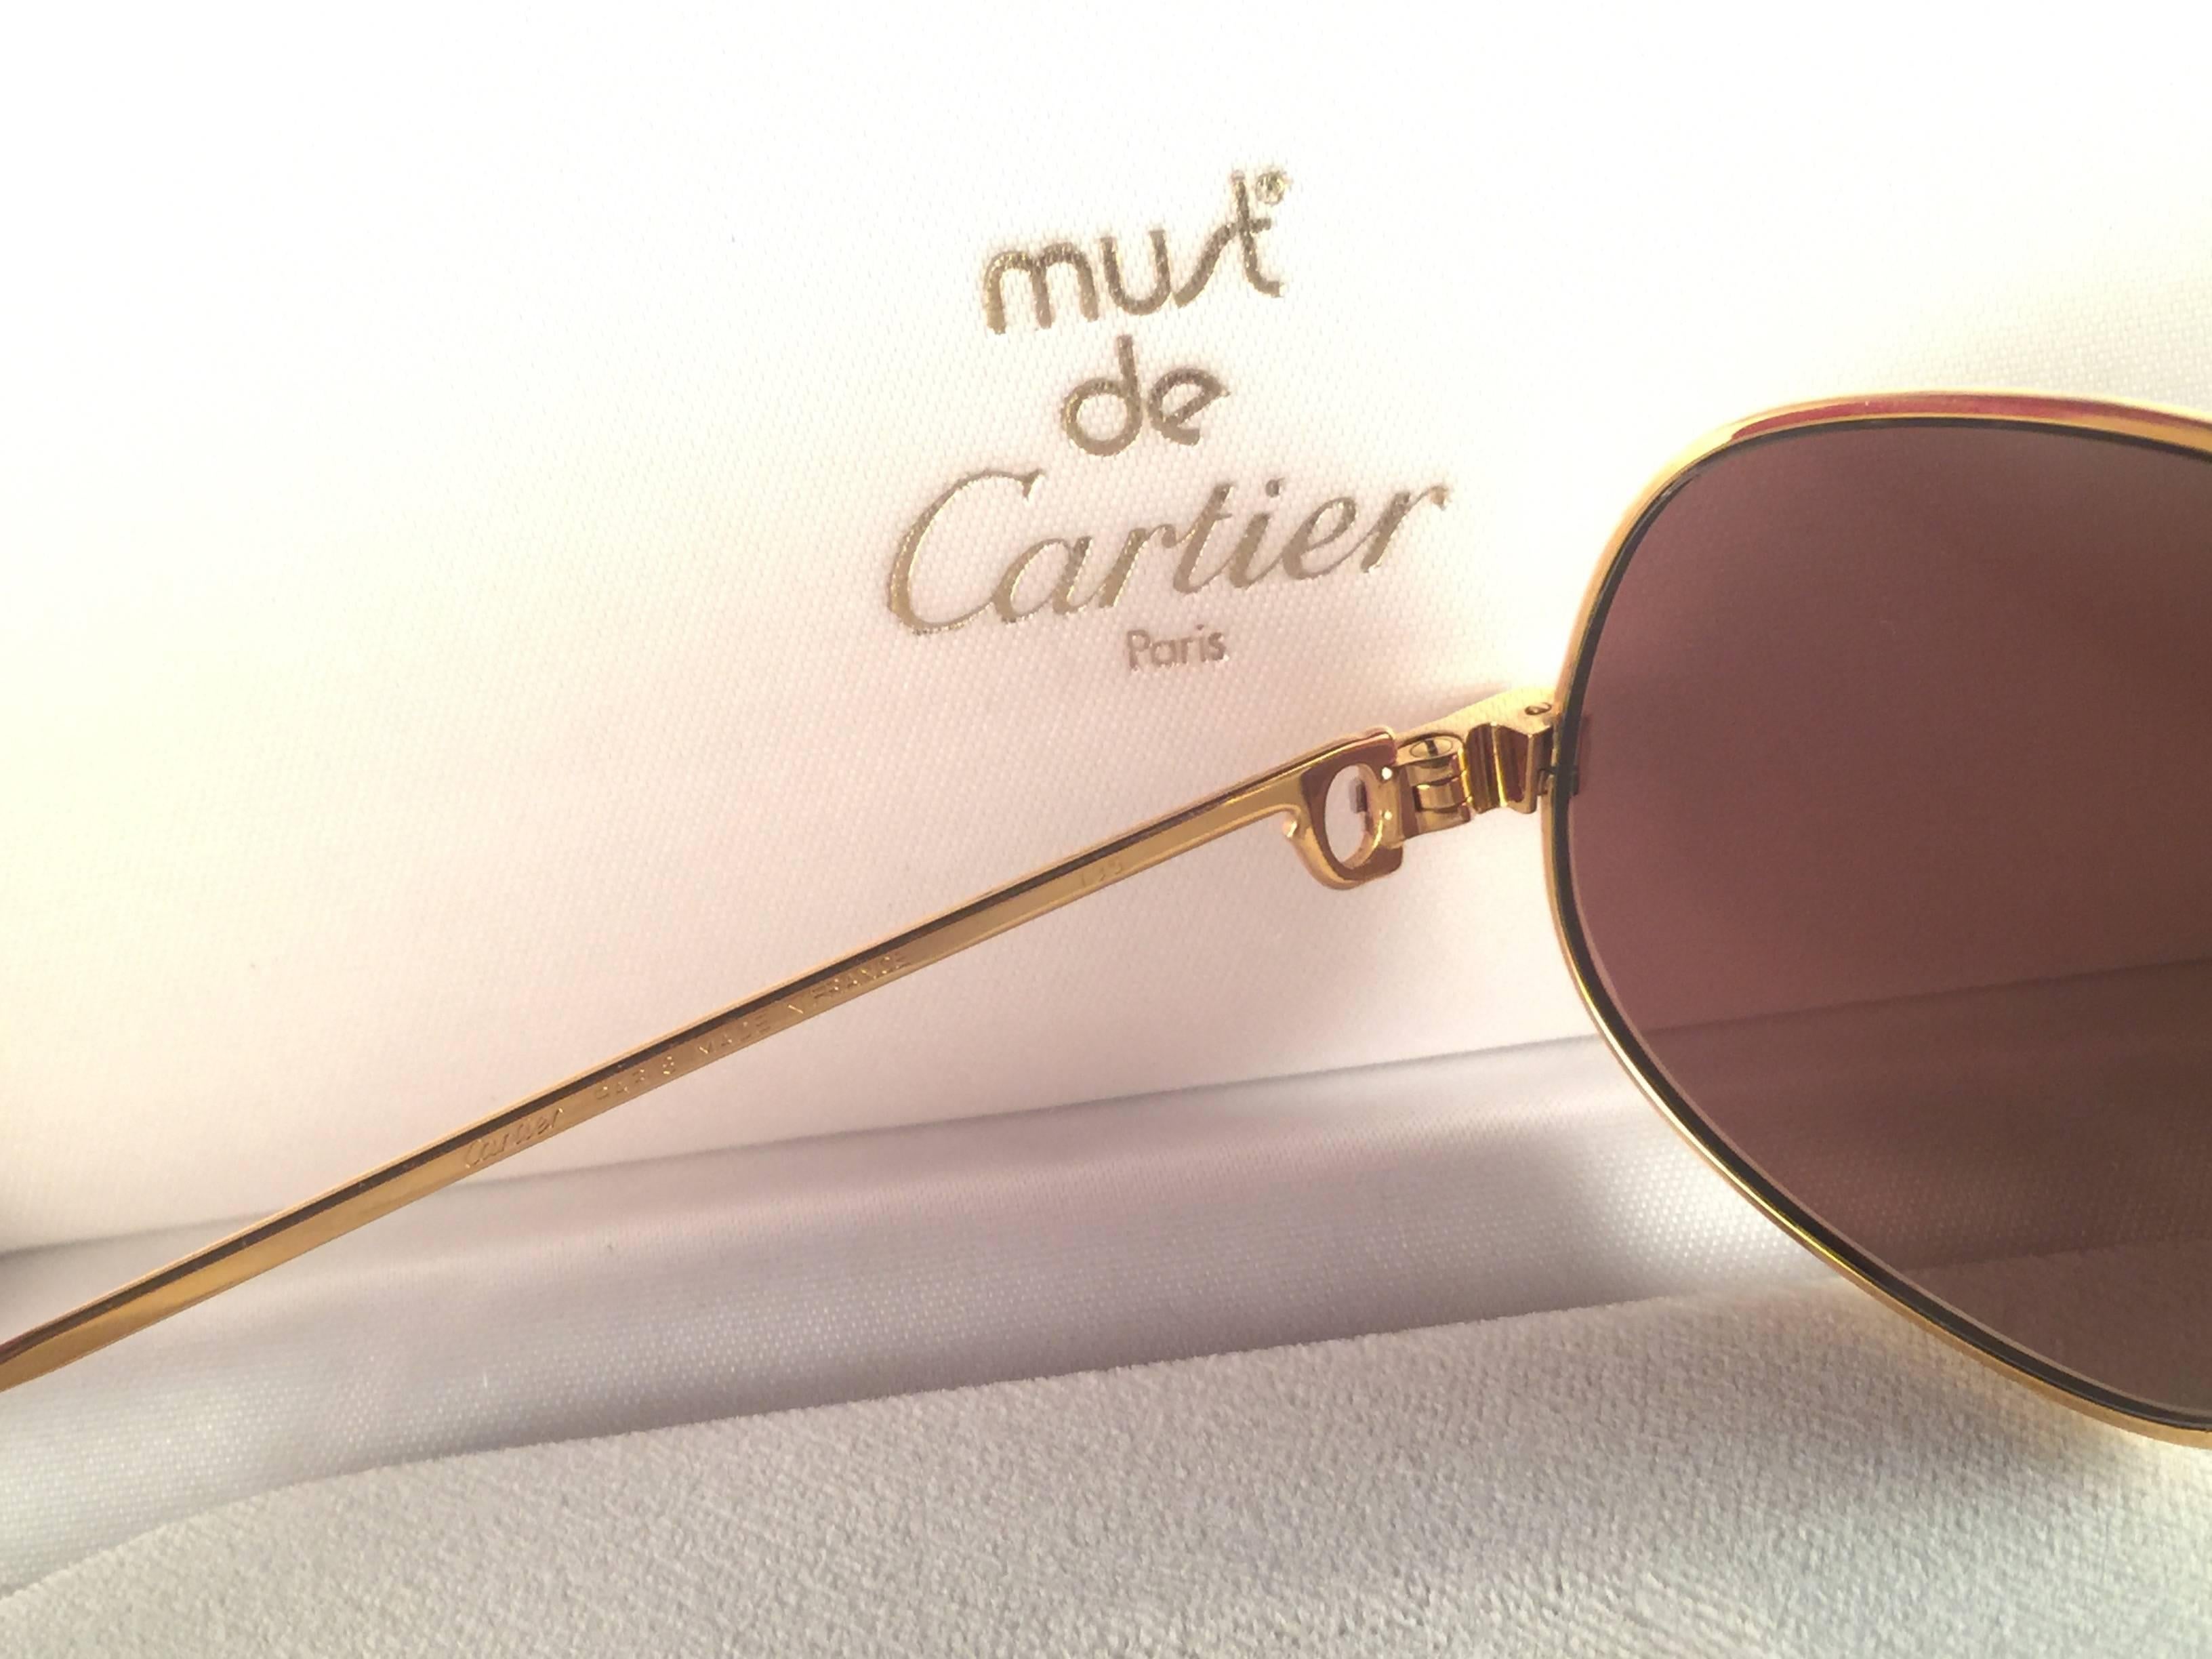 New Vintage Cartier Panthere 59mm Medium Sunglasses France 18k Gold Heavy Plated For Sale 4